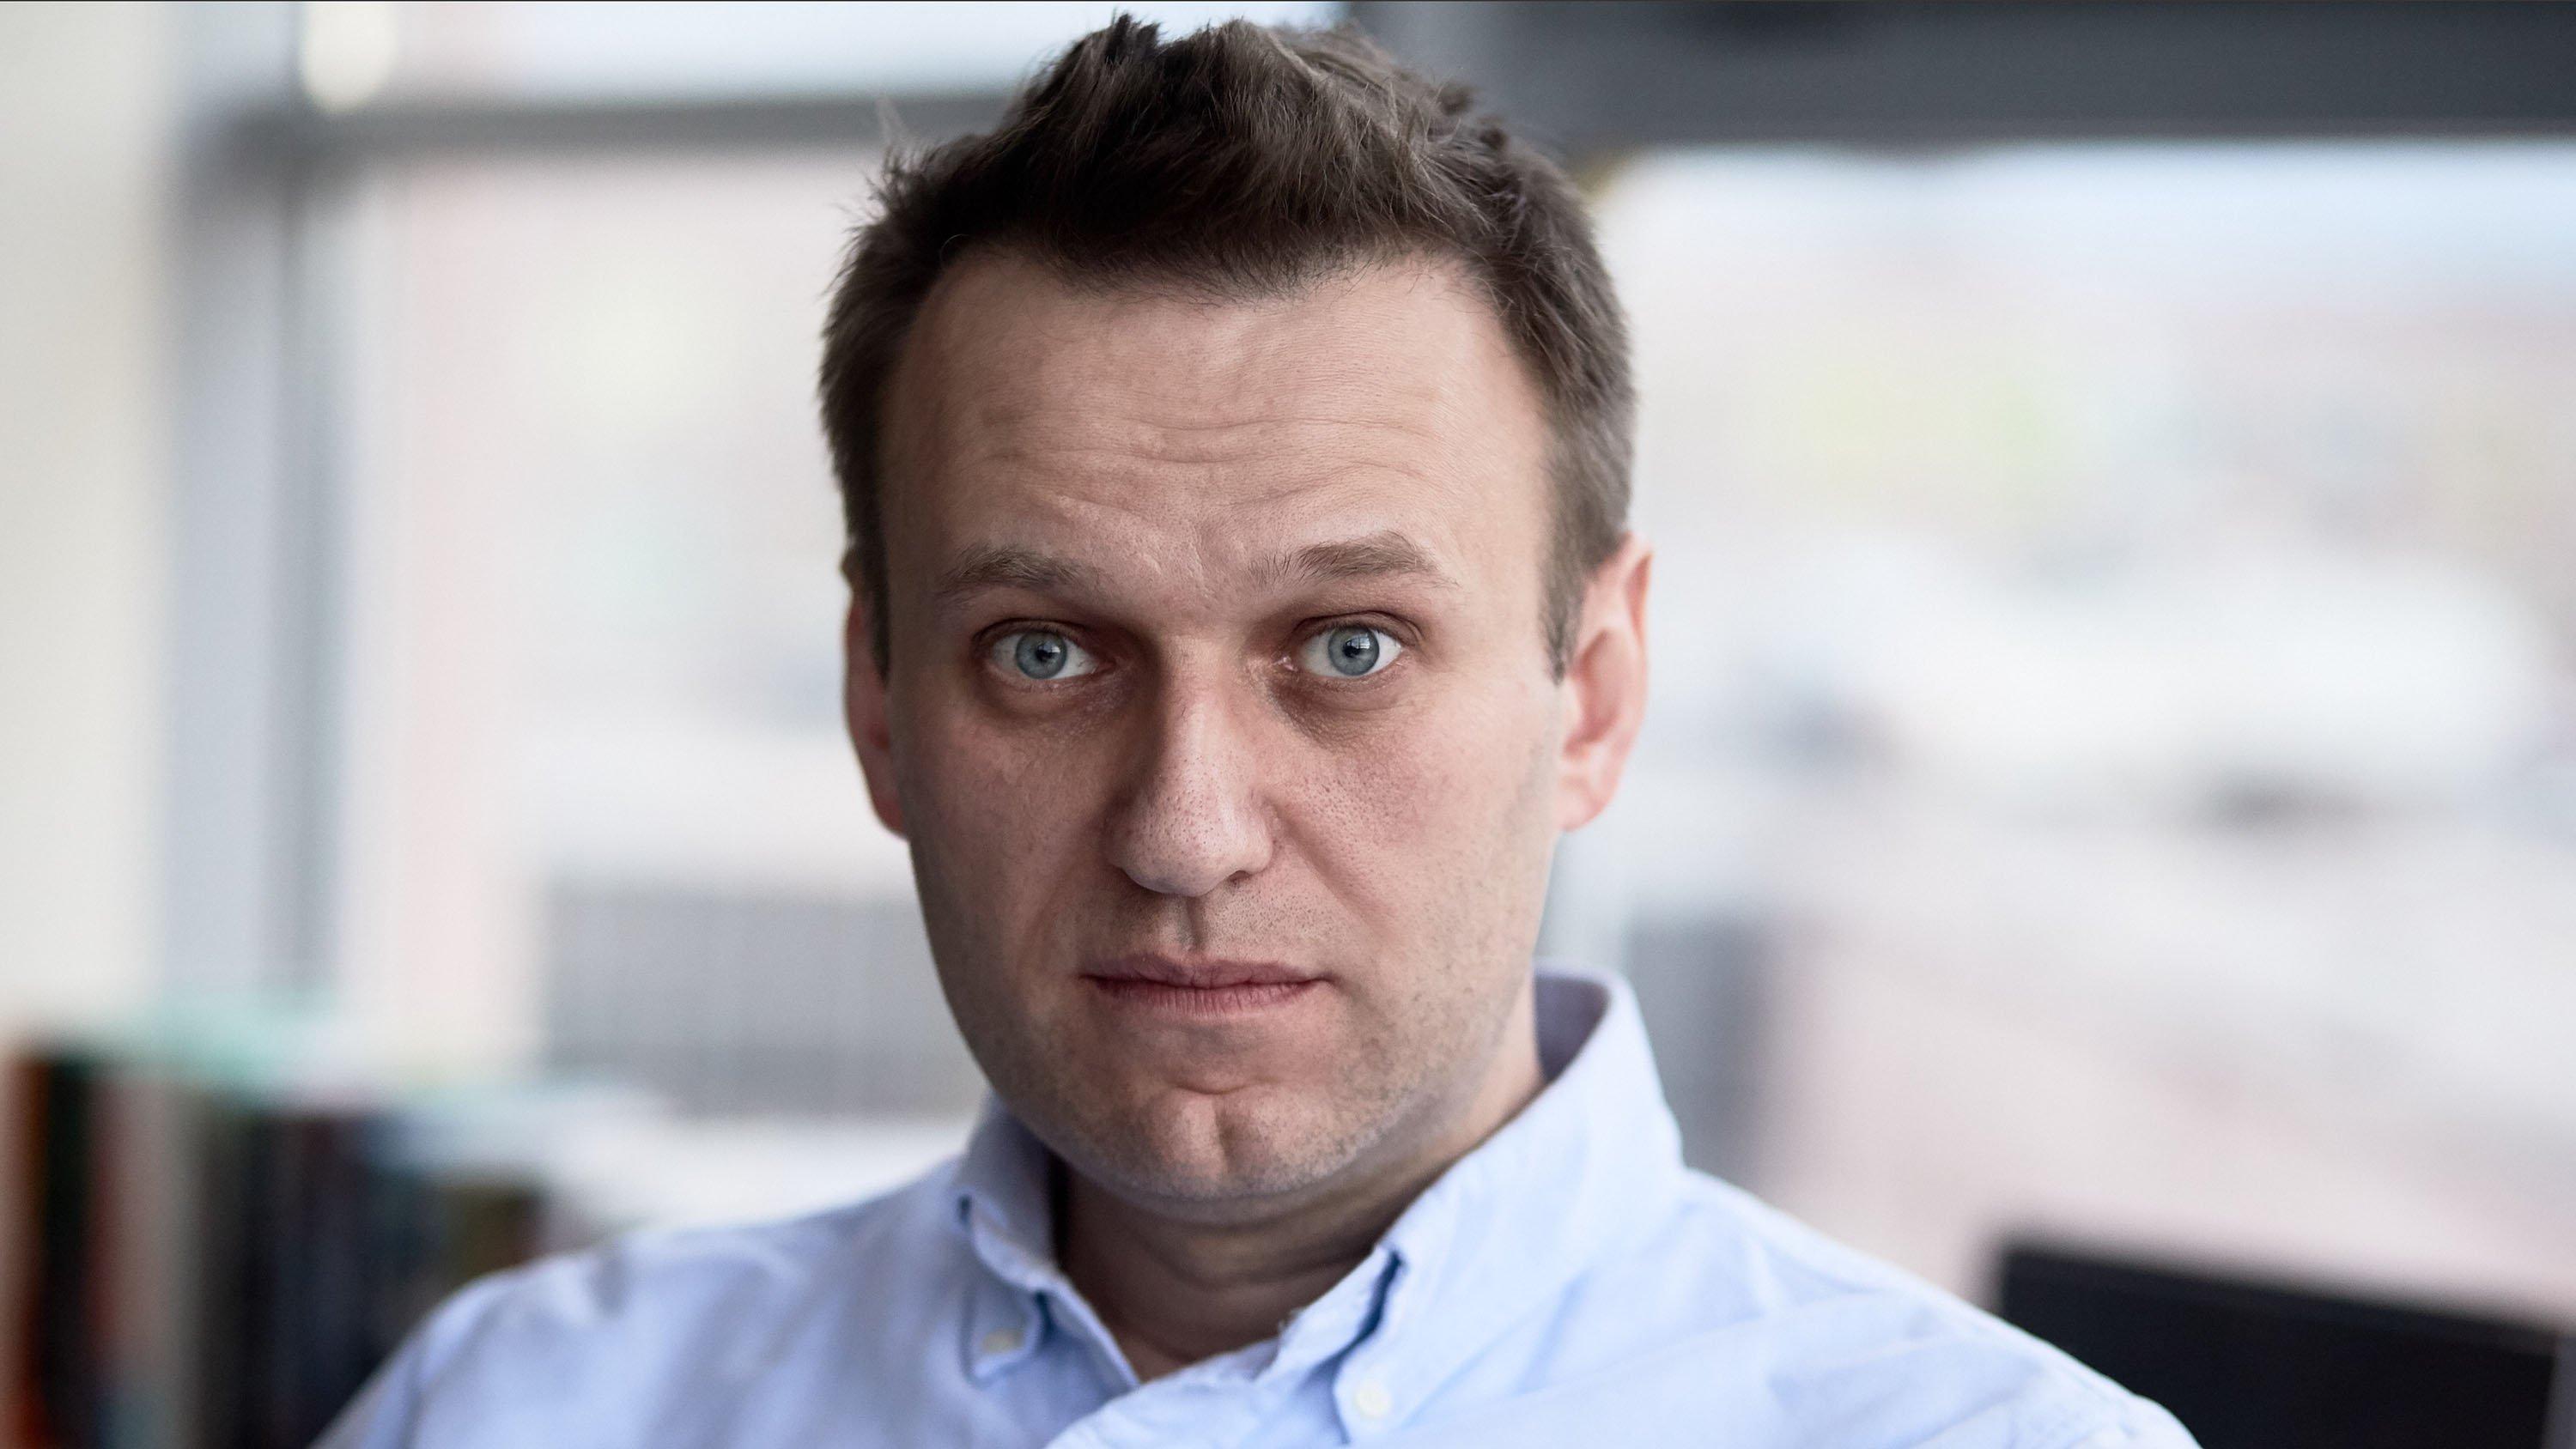 Russia launches ‘fraud’ probe against Navalny